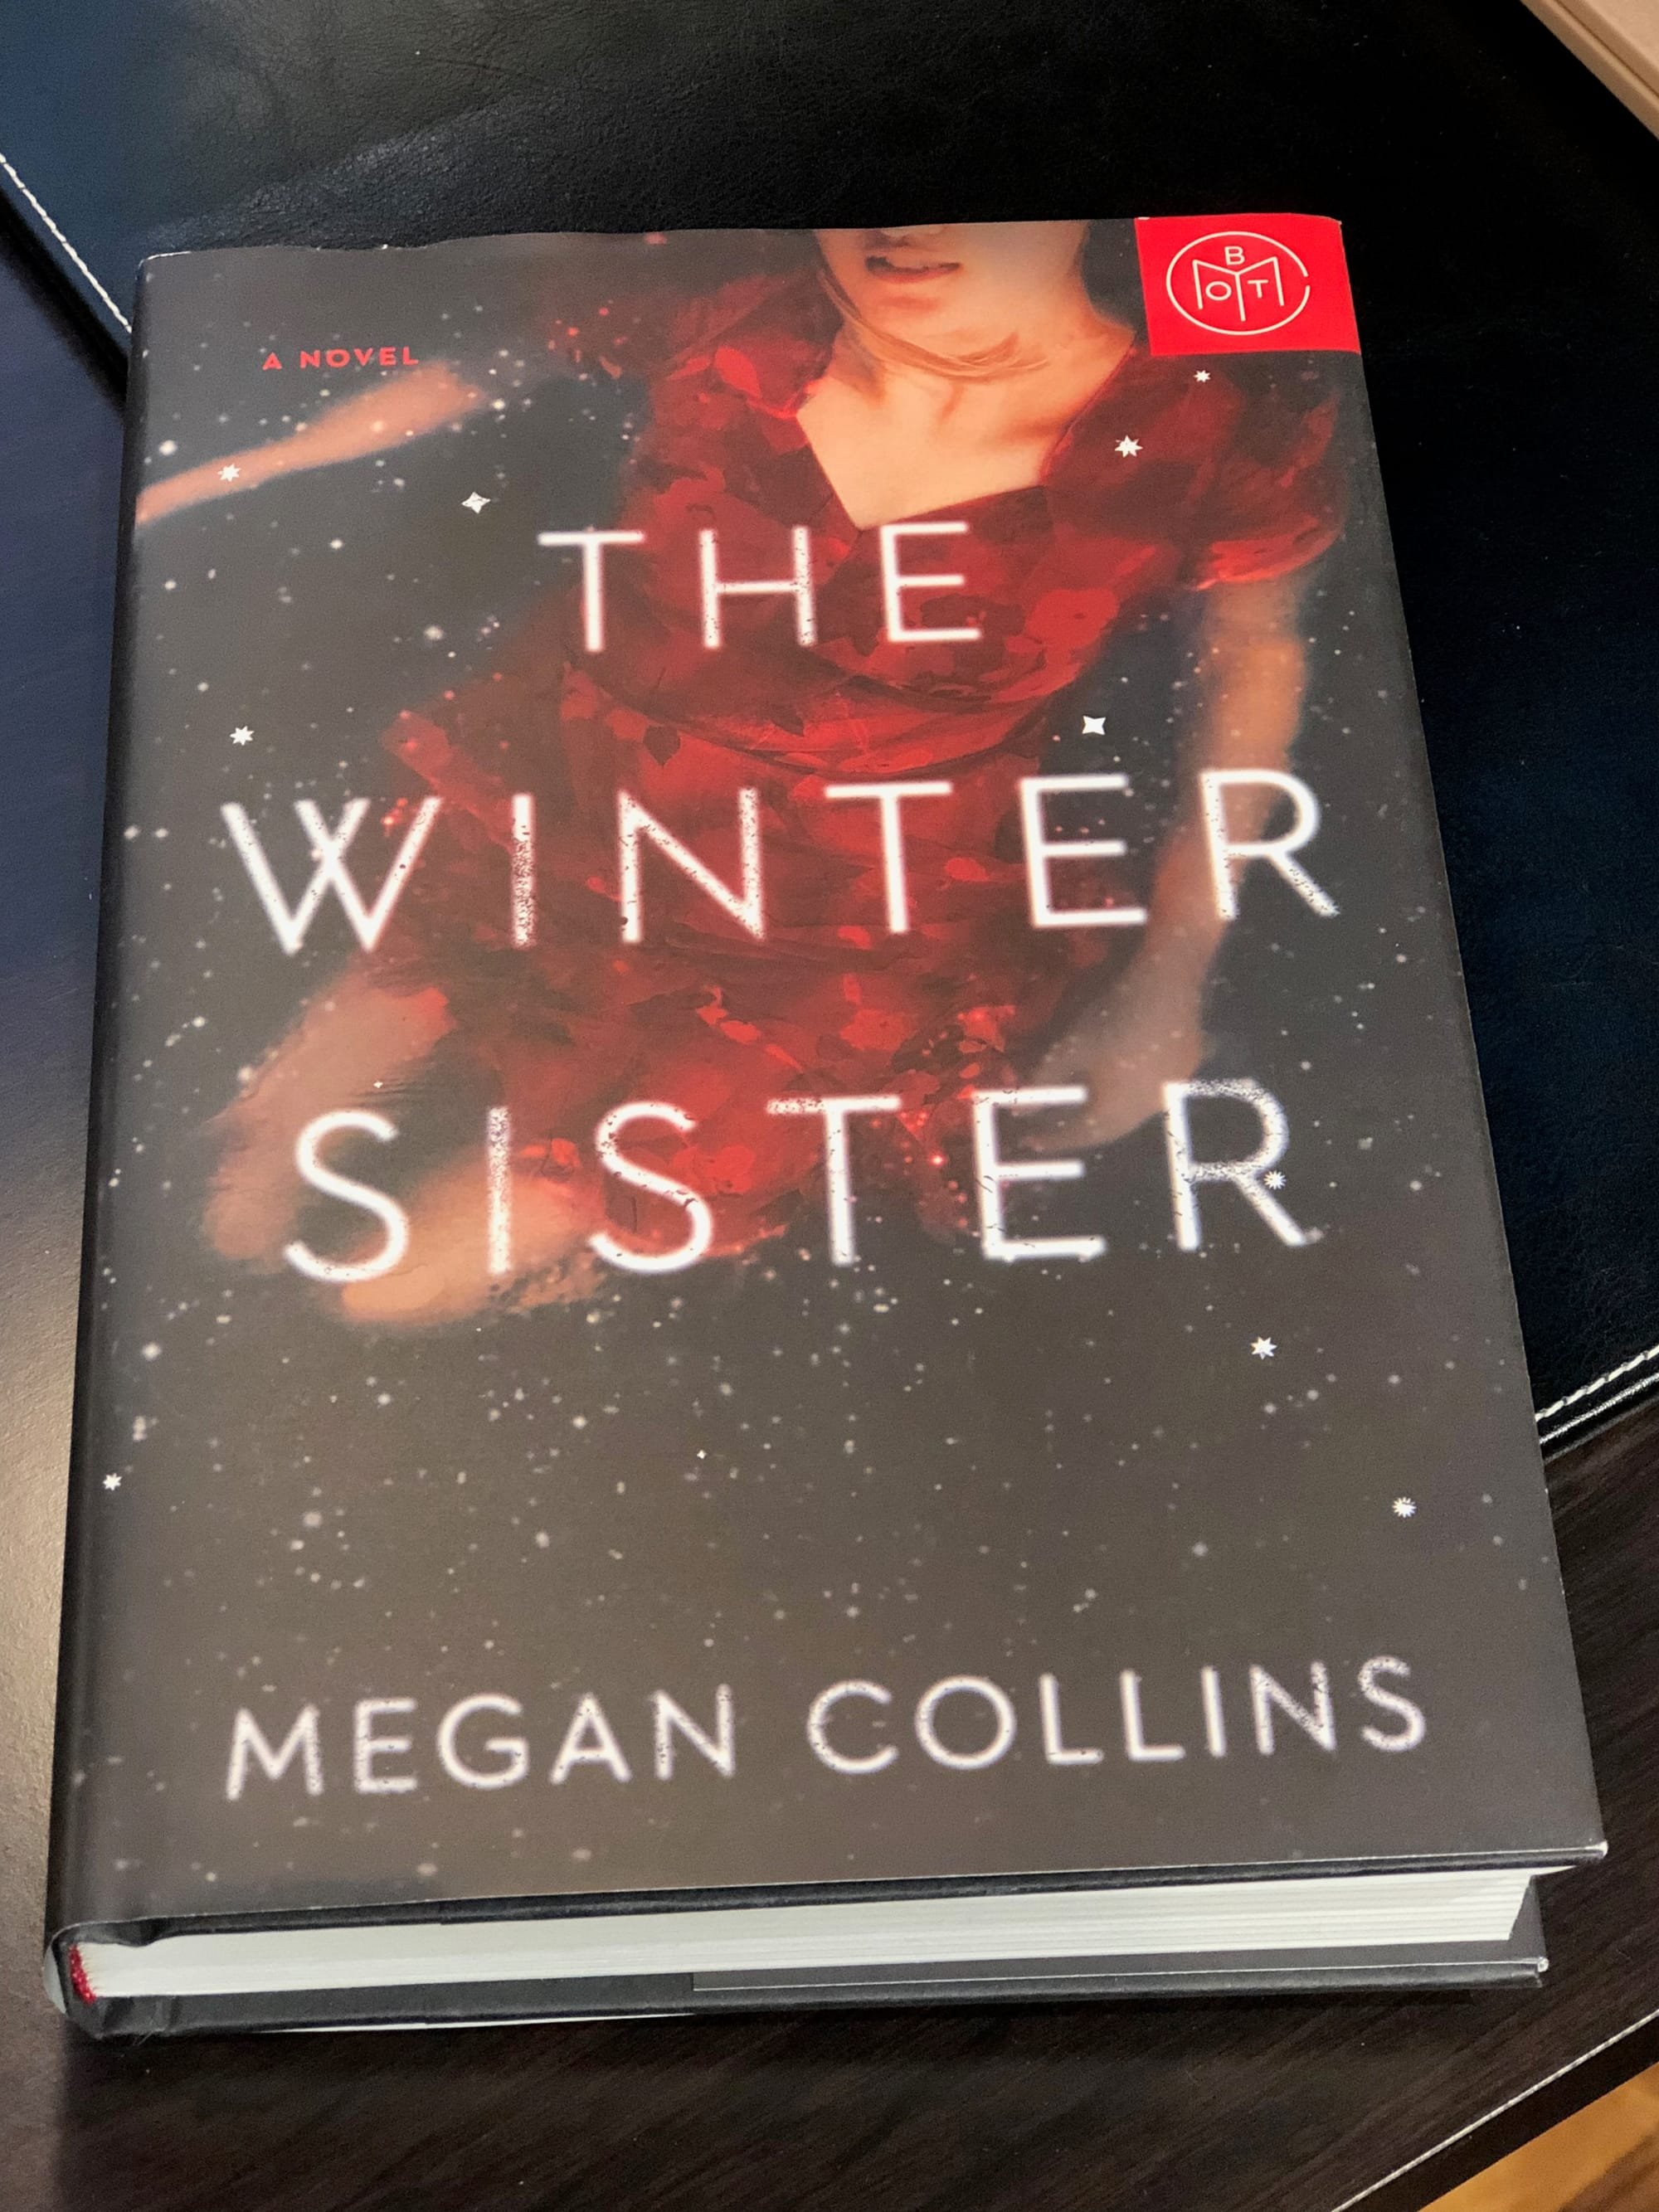 Review: The Winter Sister by Megan Collins